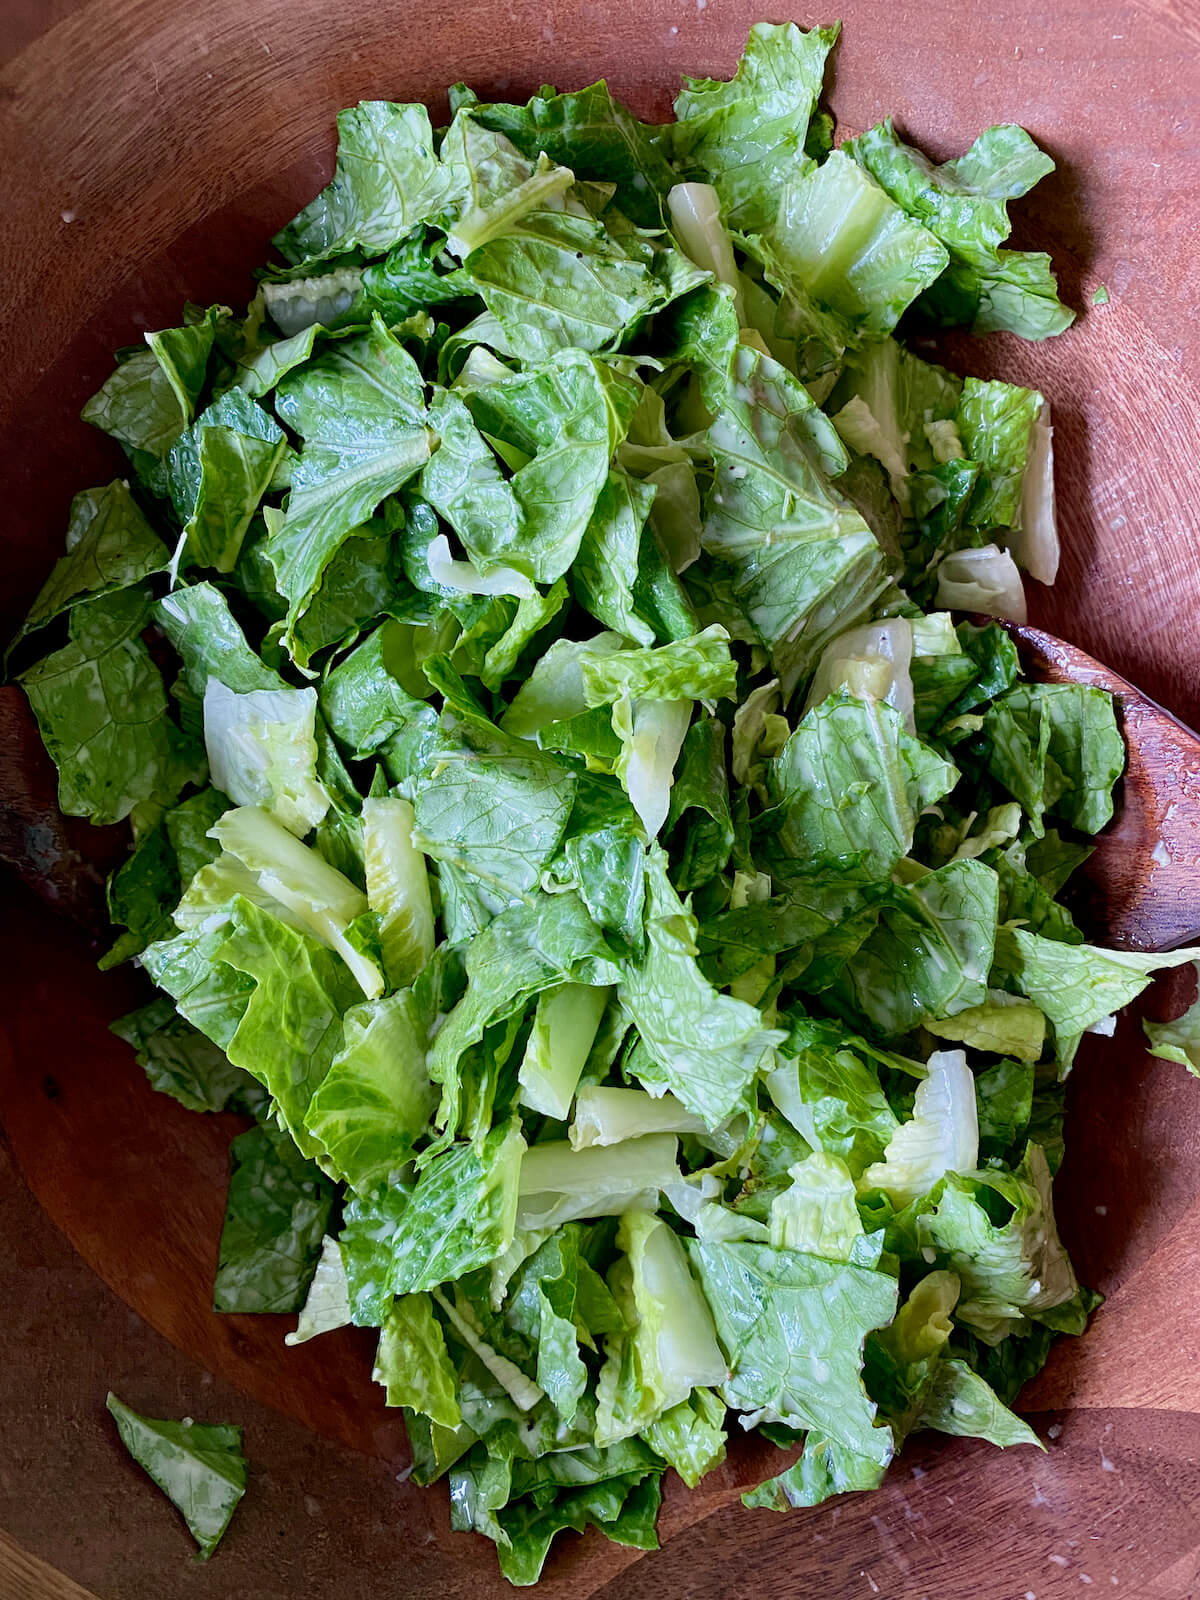 Romaine lettuce tossed with caesar dressing in a large wooden salad bowl.